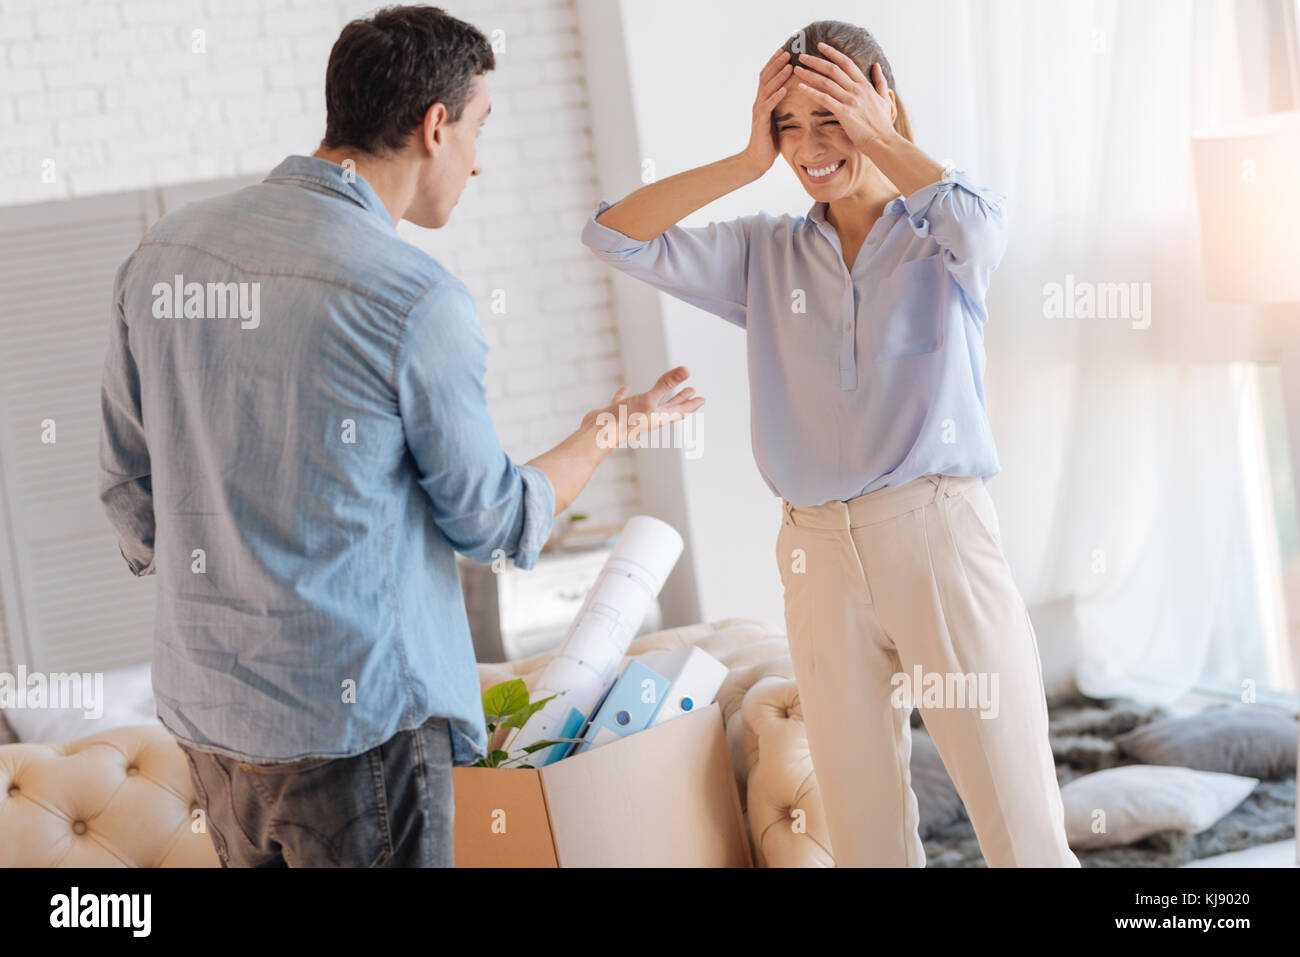 Emotional irritated woman touching her head while having a quarrel with husband Stock Photo